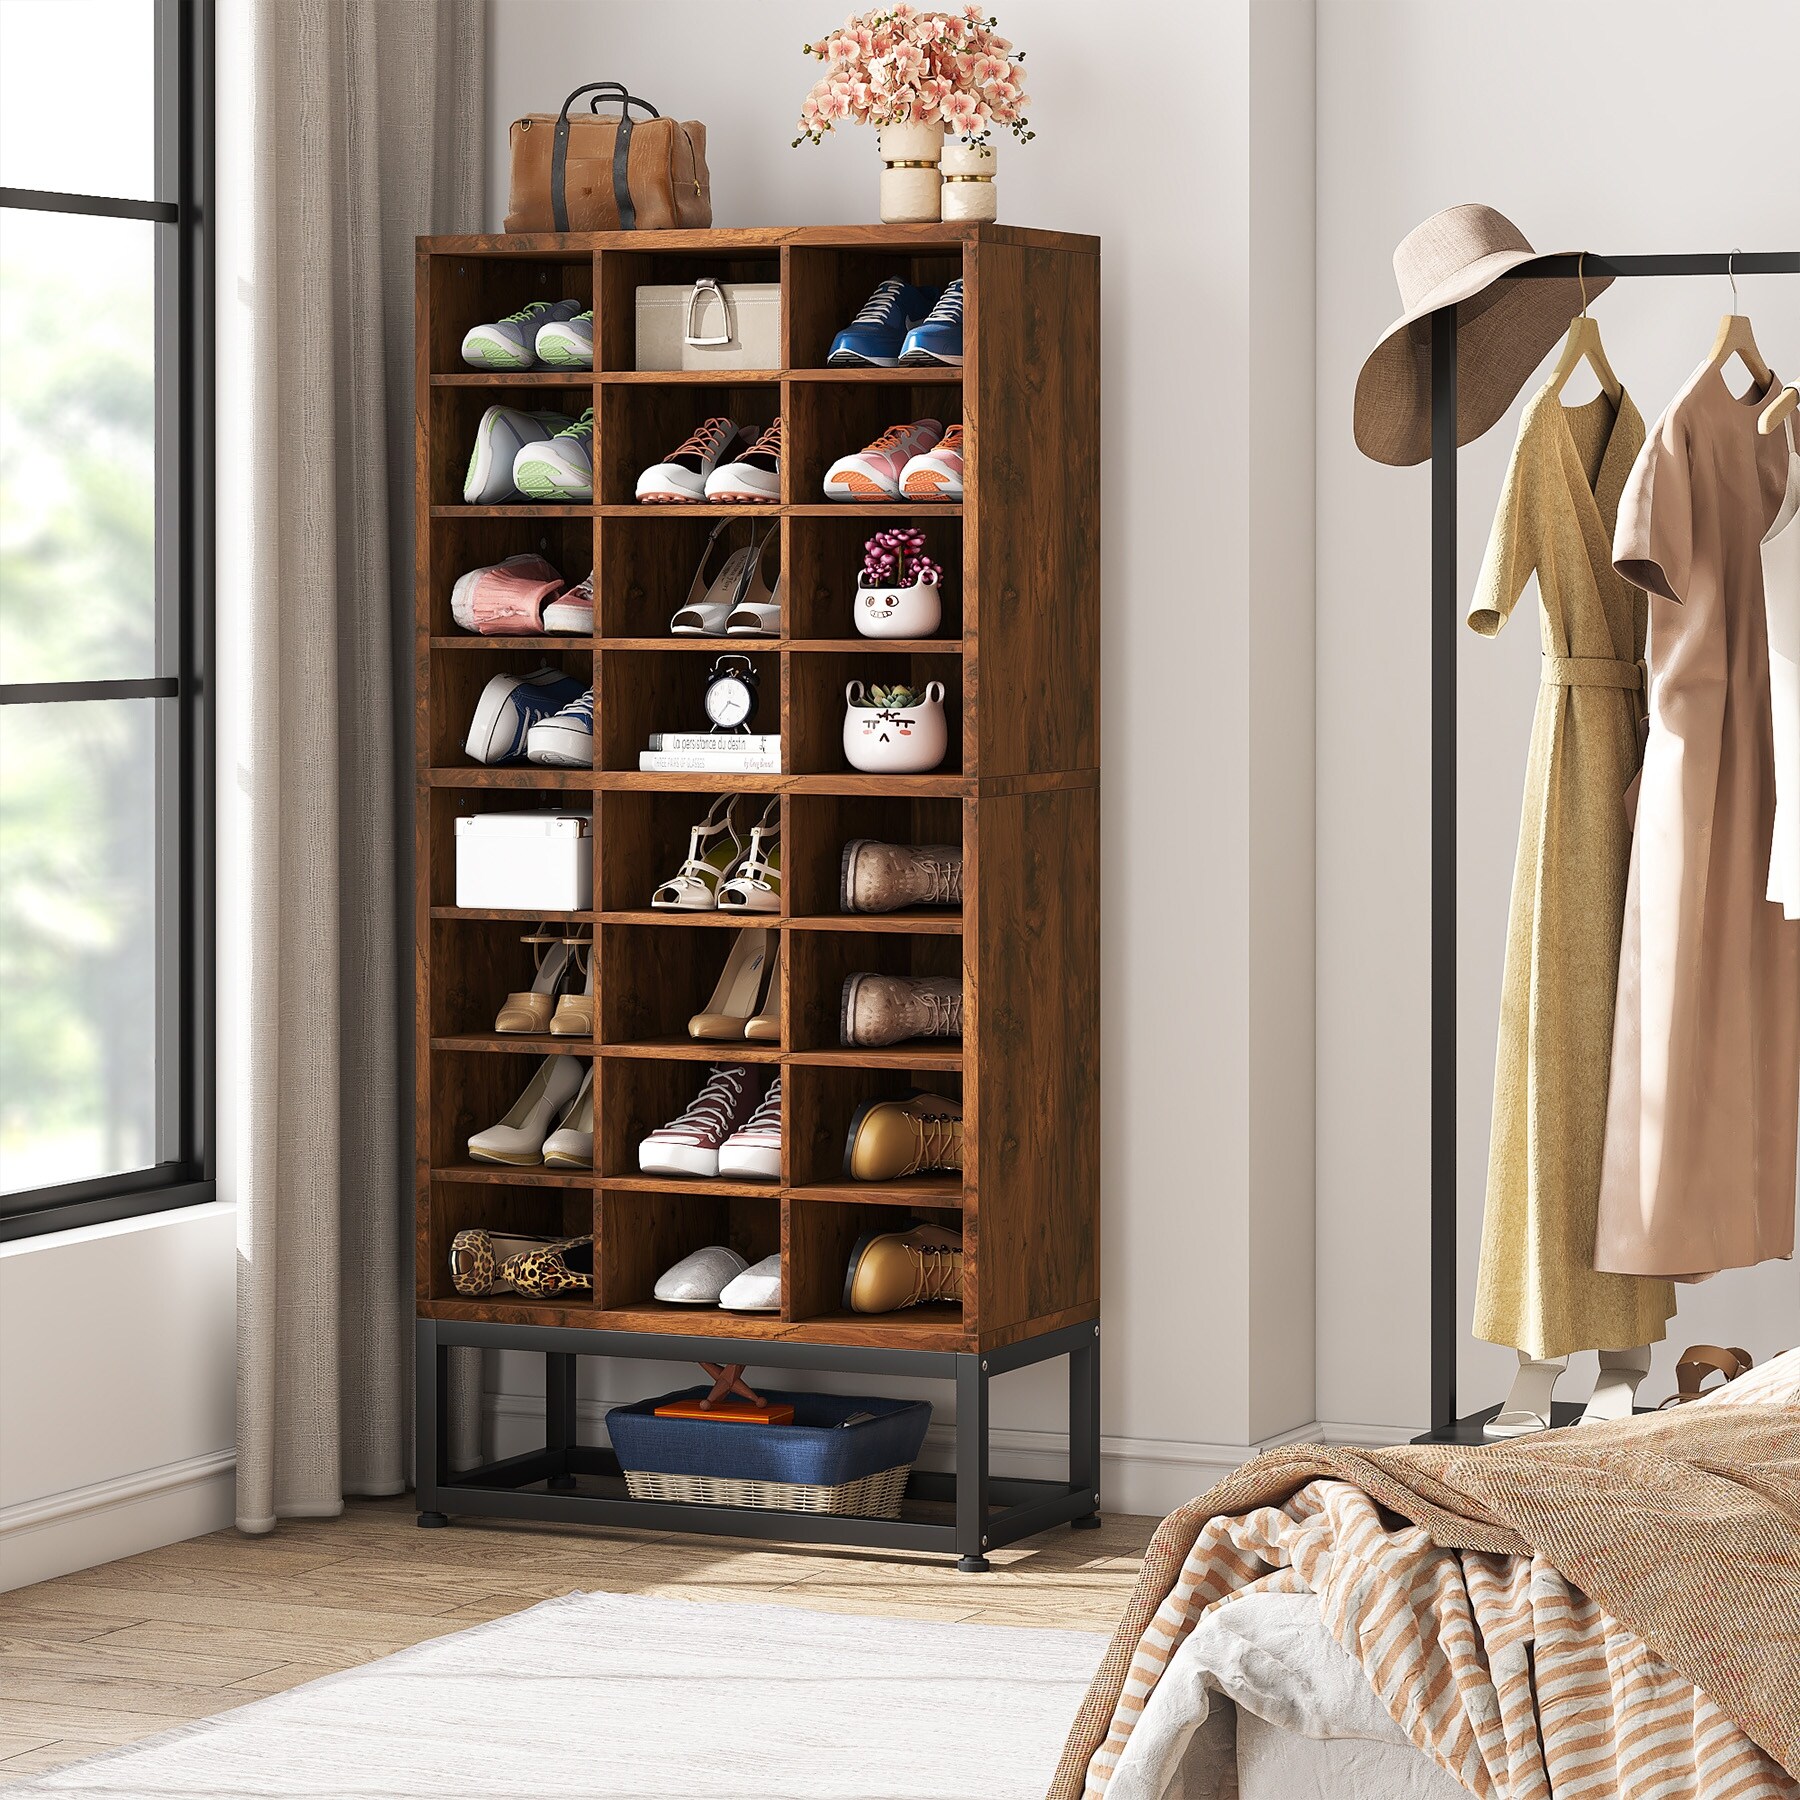 https://ak1.ostkcdn.com/images/products/is/images/direct/a1be0338712c5dbb4a7c46bf0f2161f64b578228/Shoe-Cabinet%2C-8-Tier-Shoe-Storage-Organizer-Rack-with-24-Cubbies.jpg